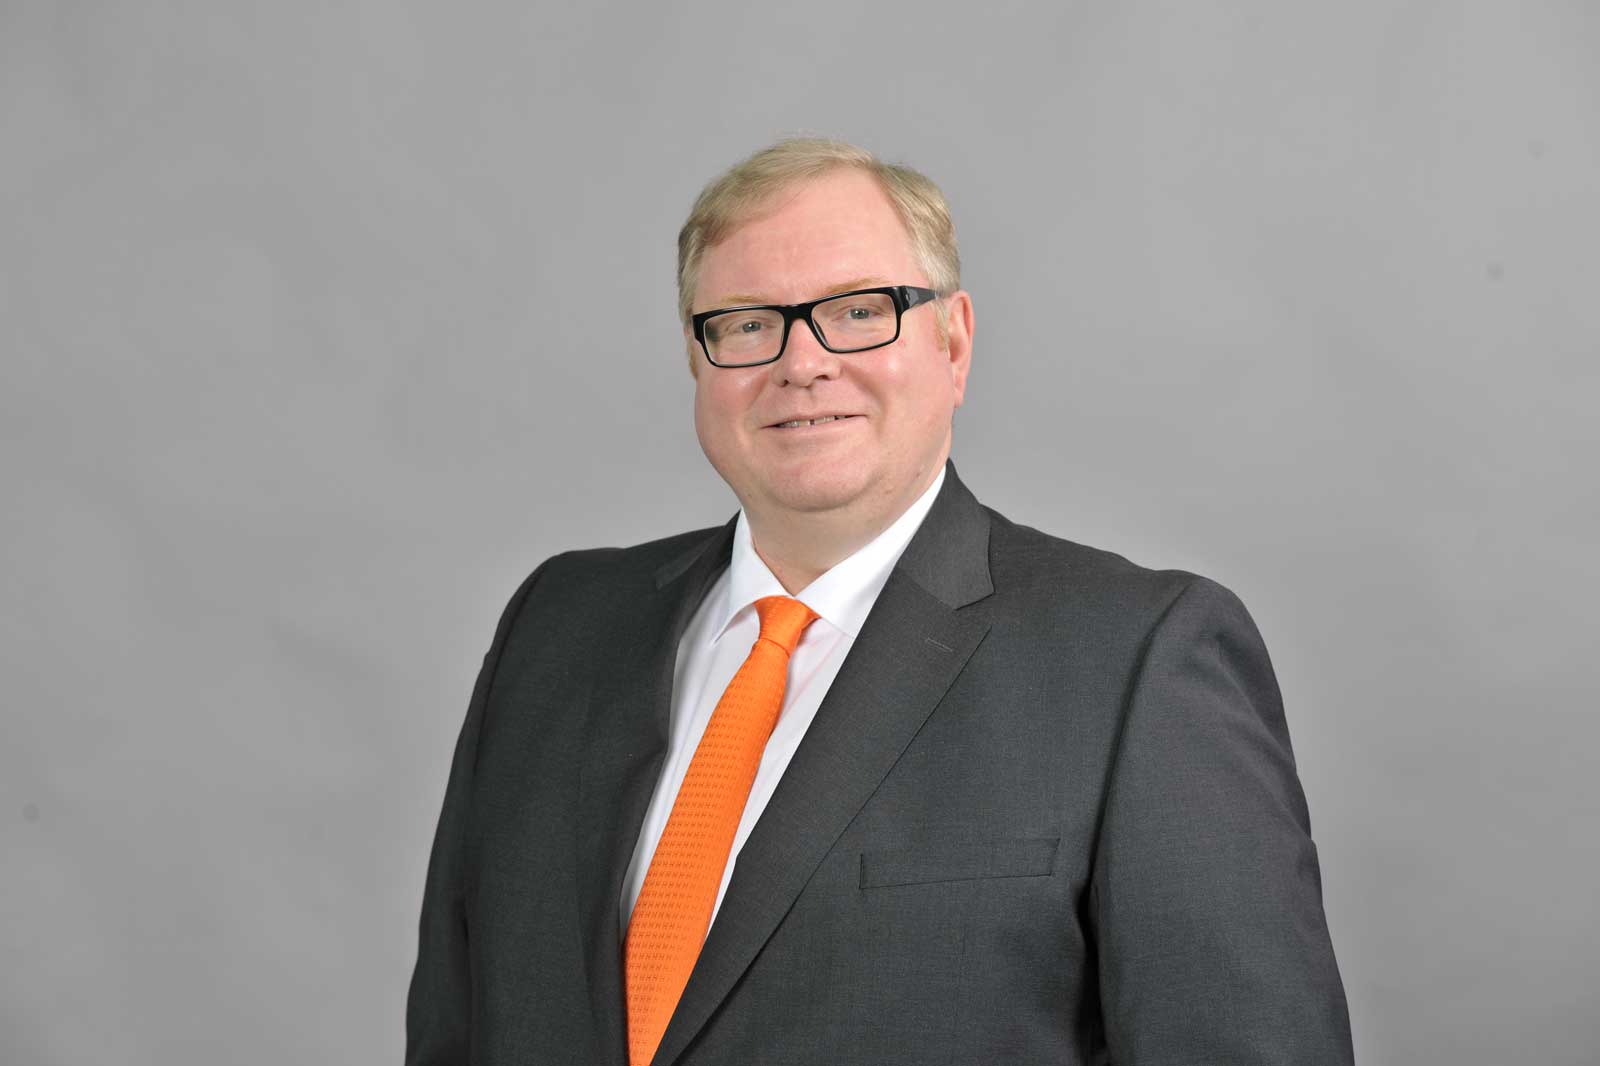 Bernd Kamphuis | Head of Contract Management & Project Support @ RWE Technology GmbH